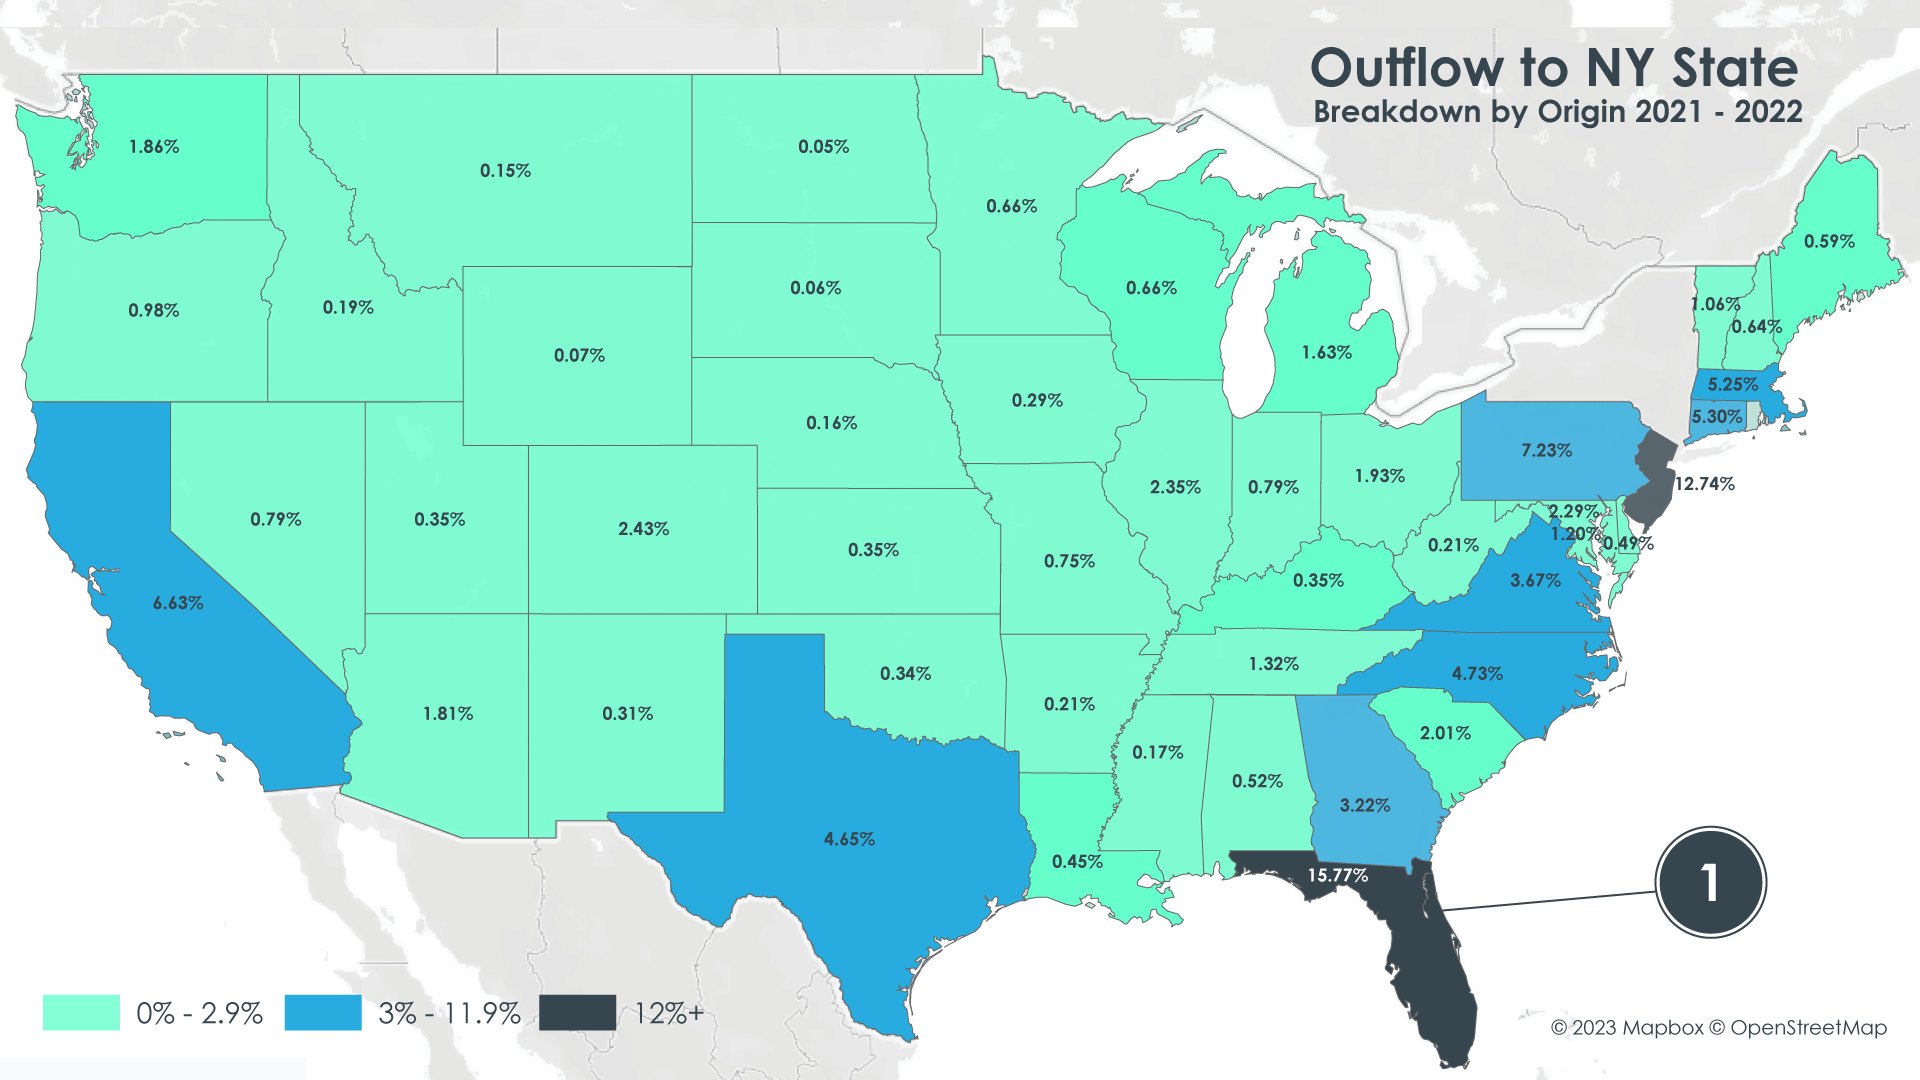 Population Data and outflow to New York State